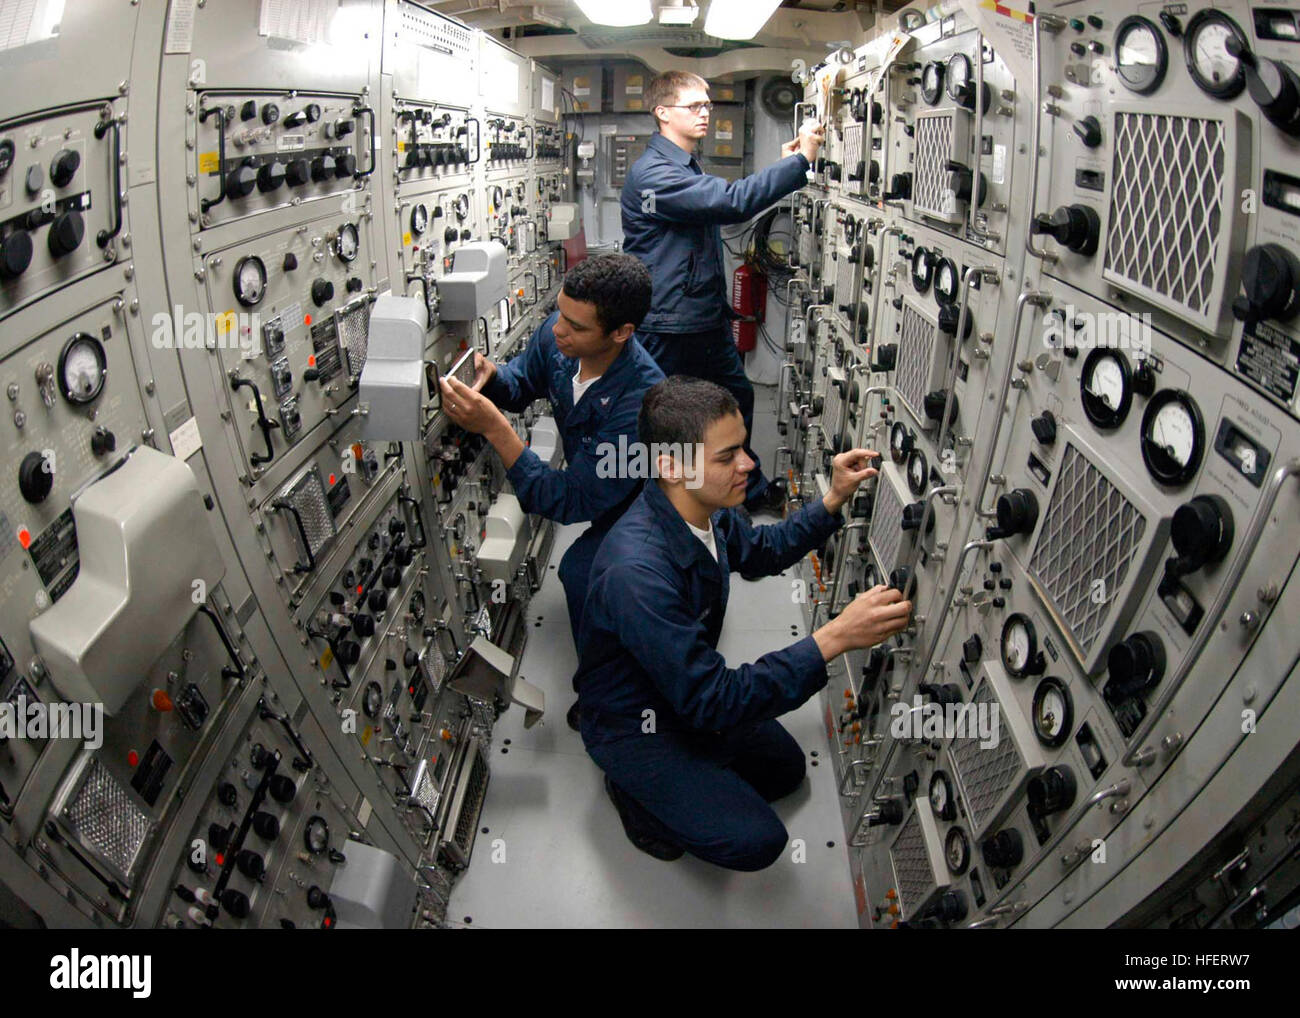 041207-N-5362F-304 Pacific Ocean (Dec. 7, 2004) - From foreground, Information Systems Technician Seaman Ivan Monserrat, Electronics Technician 3rd Class Paul Burnett and Electronics Technician 3rd Class Robert Cantero, uses high frequency radios and couplers aboard USS Shiloh (CG 67) to talk with other ships in the USS Abraham Lincoln (CVN 72) Carrier Strike Group (CSG). Shiloh is part of the Lincoln CSG currently deployed to the Western Pacific Ocean. U.S. Navy photo by Photographer's Mate 3rd Class Bernardo Fuller (RELEASED) US Navy 041207-N-5362F-304 Sailors use high frequency radios and c Stock Photo